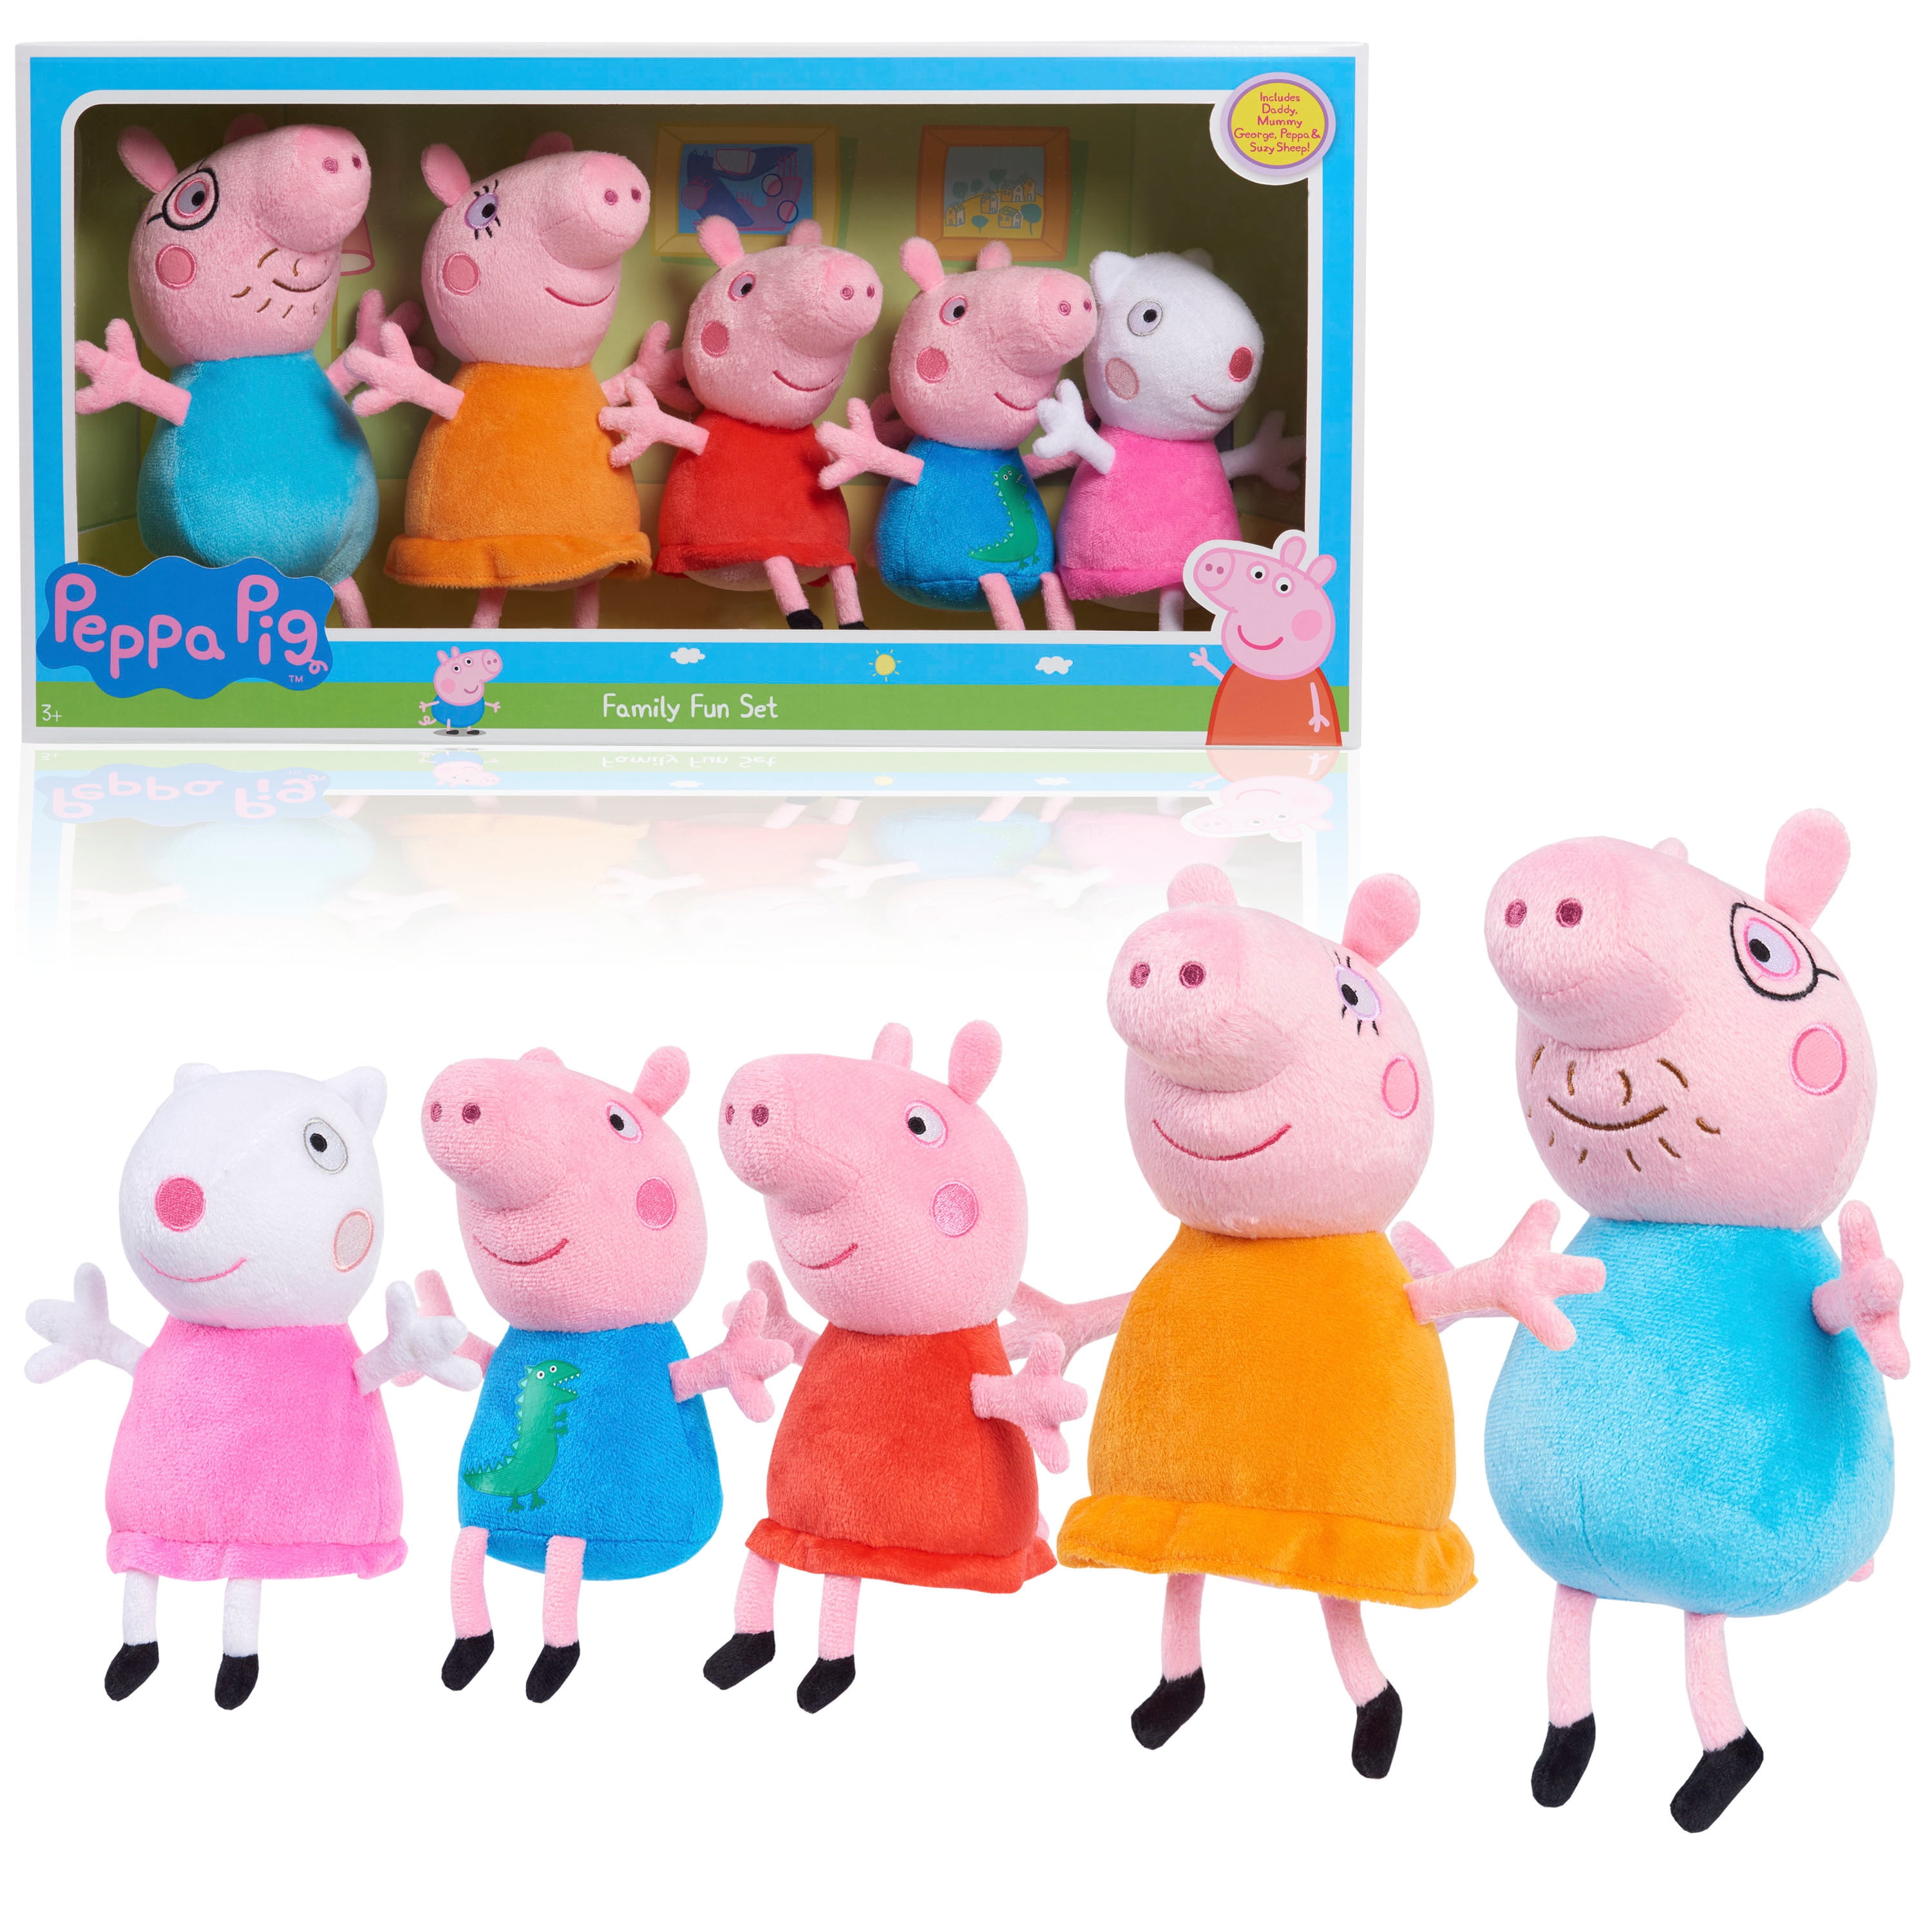 Peppa Pig Family Fun Plush Toys 5 Pack Includes Peppa, George